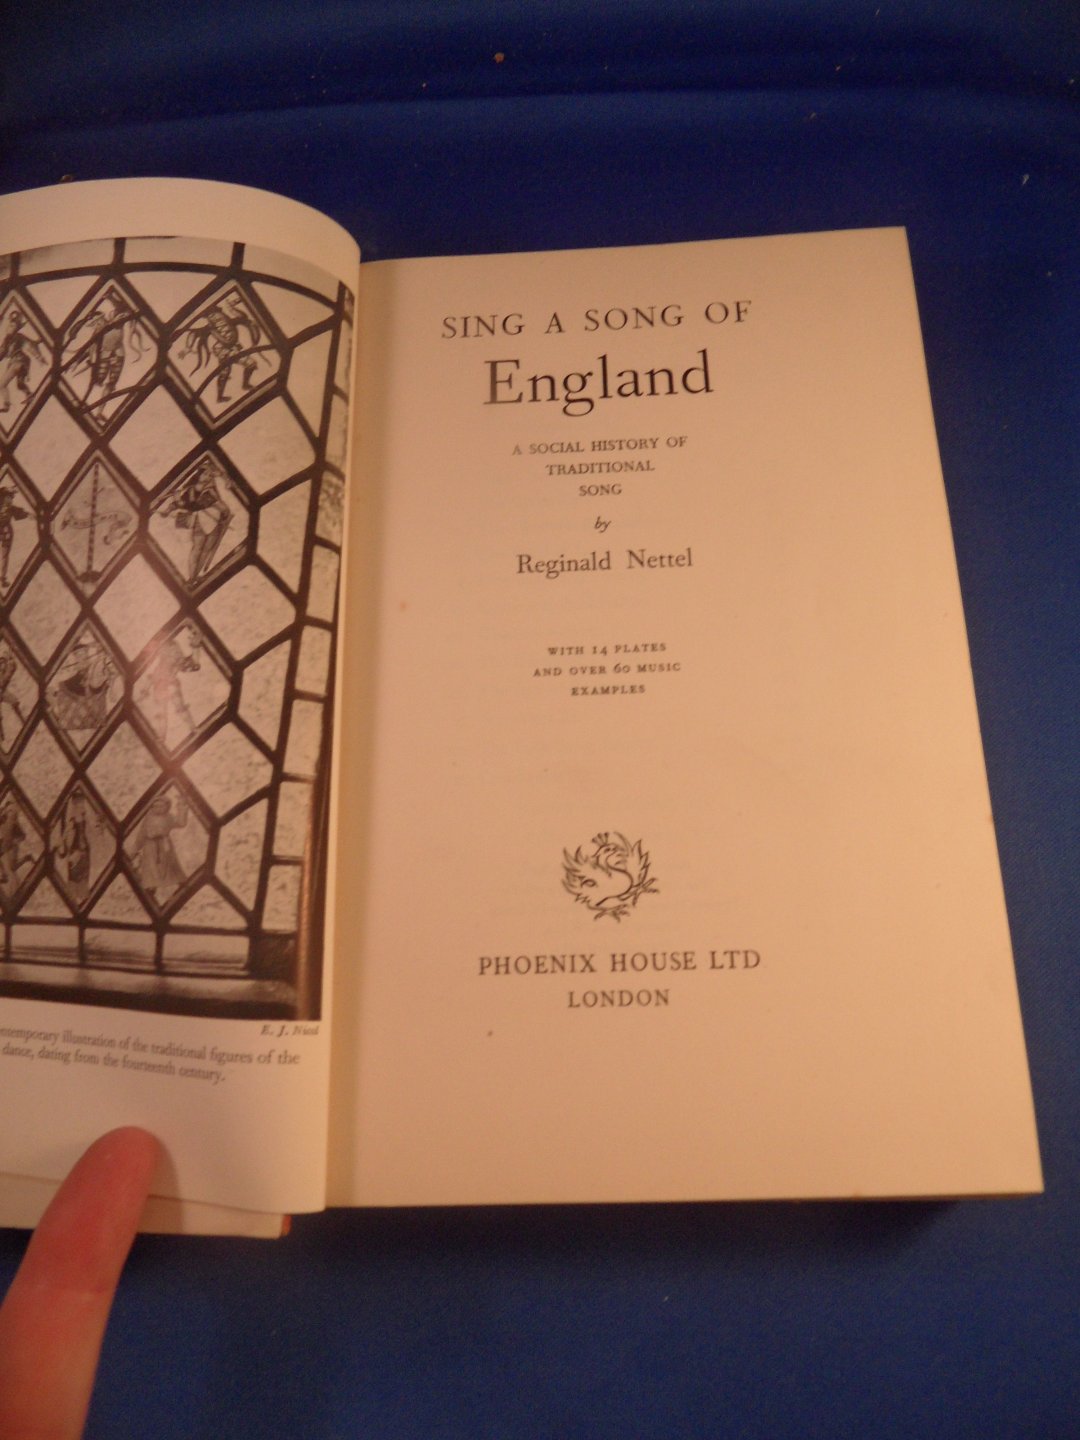 Nettel, Reginald - Sing a Song of England. A social history of traditional song